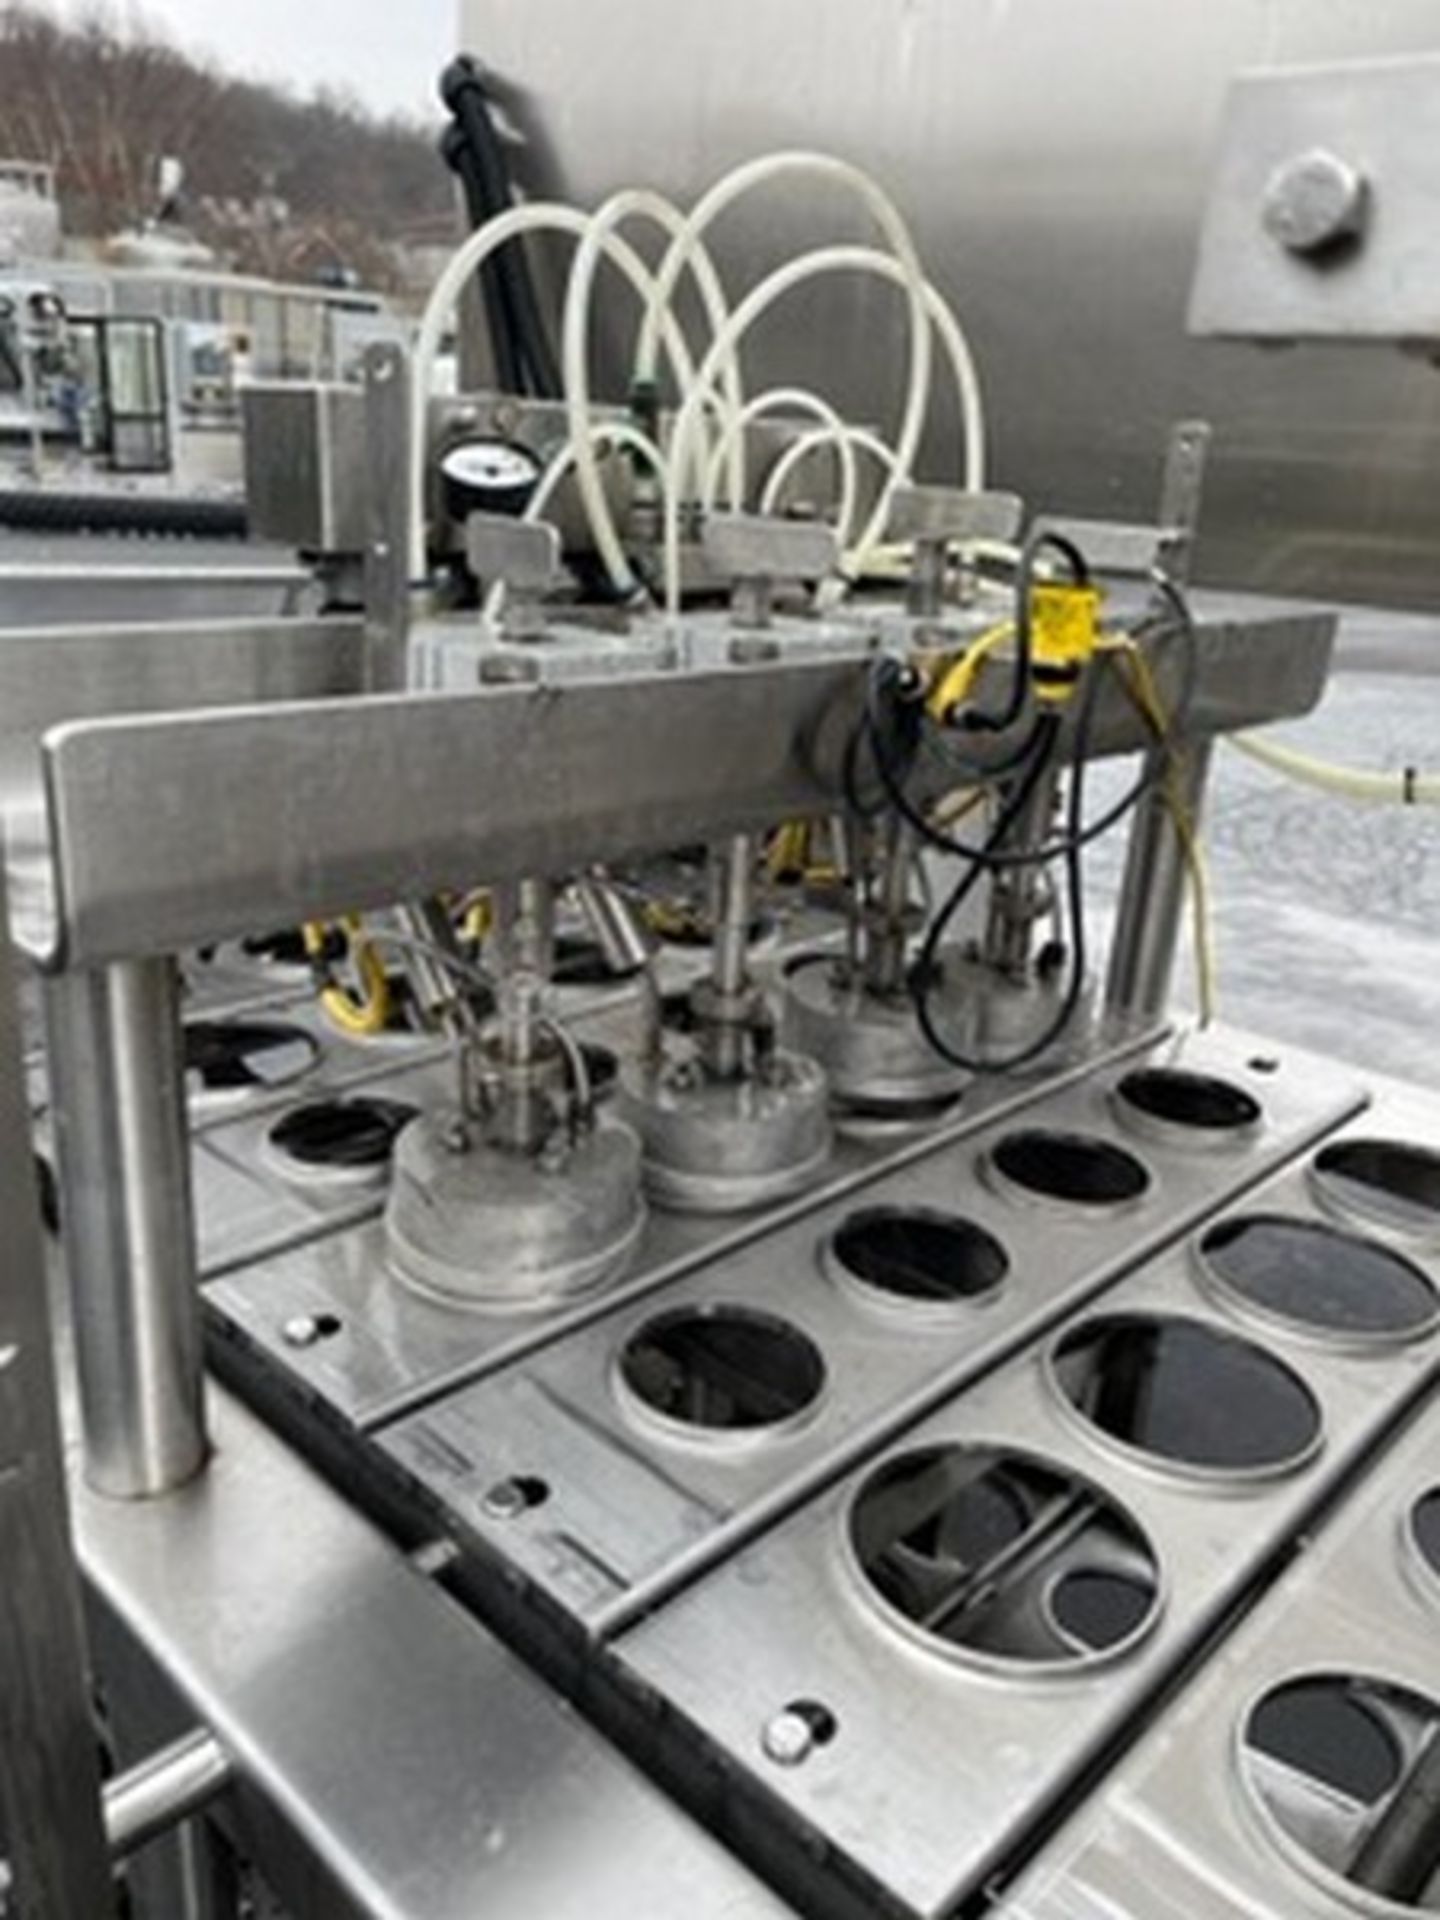 Osgood 4-Lane In-Line S/S Cup Filler,M/N 4800-E, S/N 351-840, Set Up with 3-5/8" W On-Board Change - Image 7 of 18